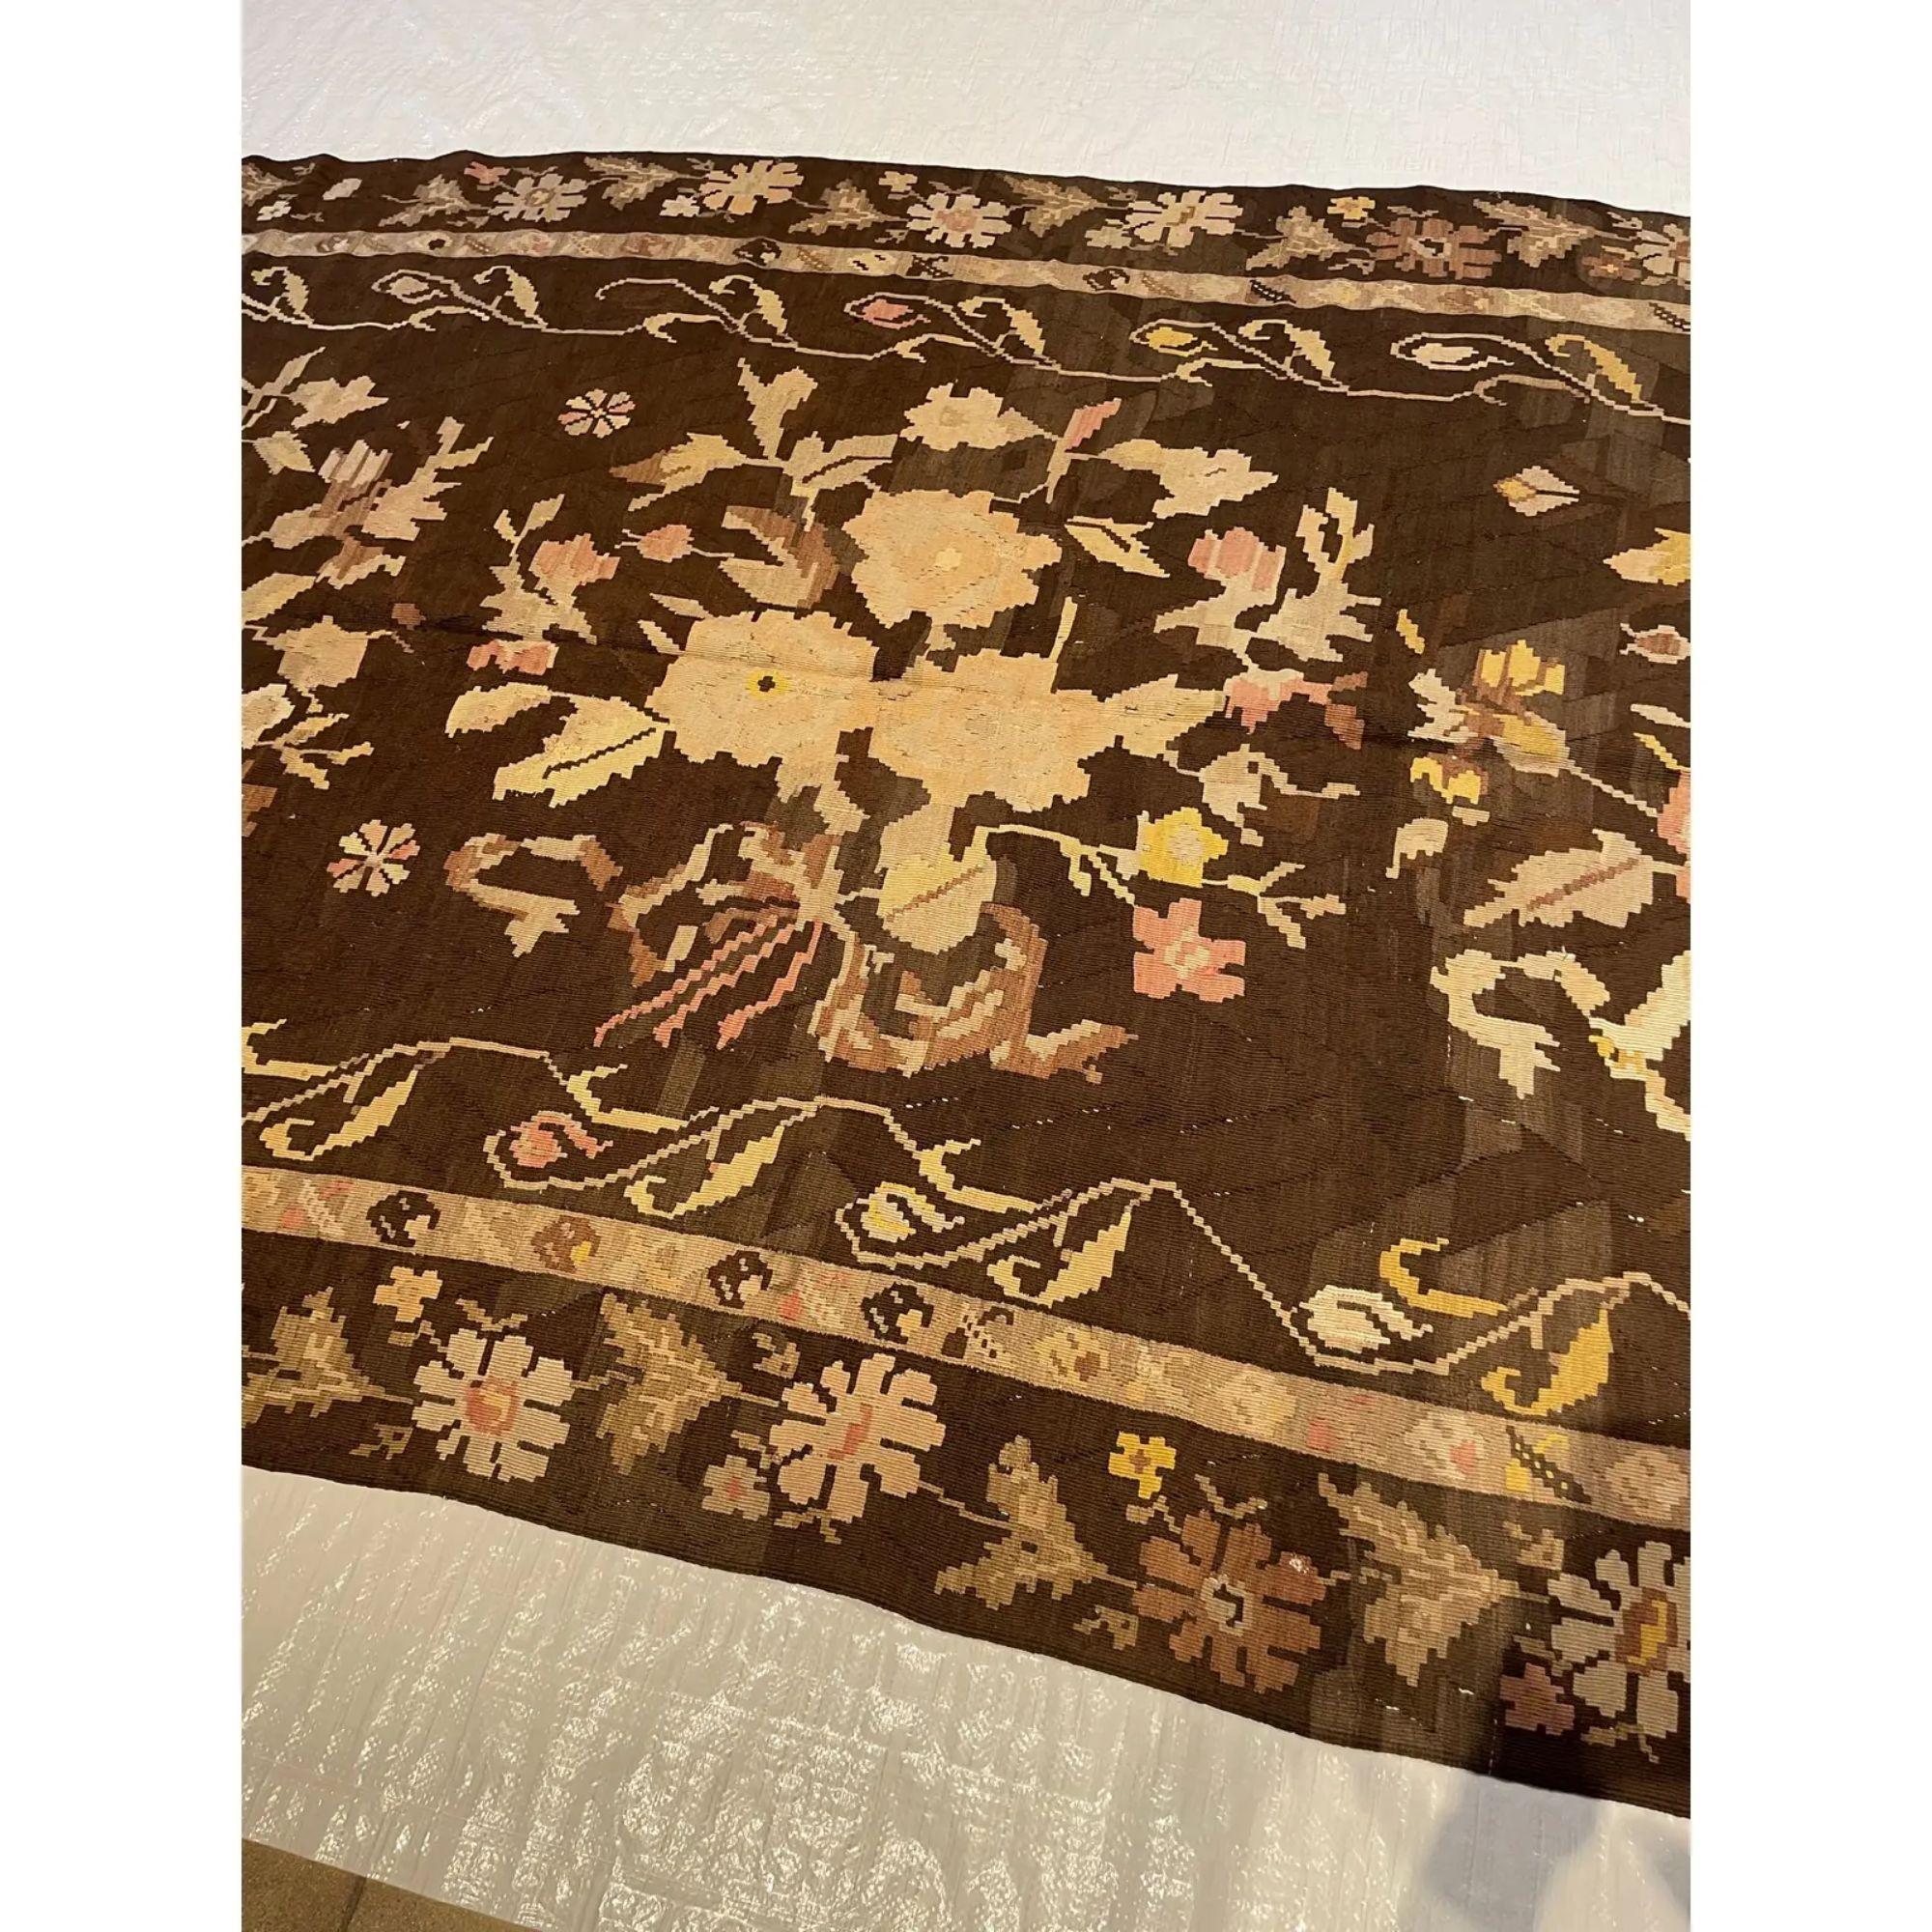 one of a kind 1 of 1

more info upon request

Antique Bessarabian Stylish Floral Design 13'8'' X 5'8''